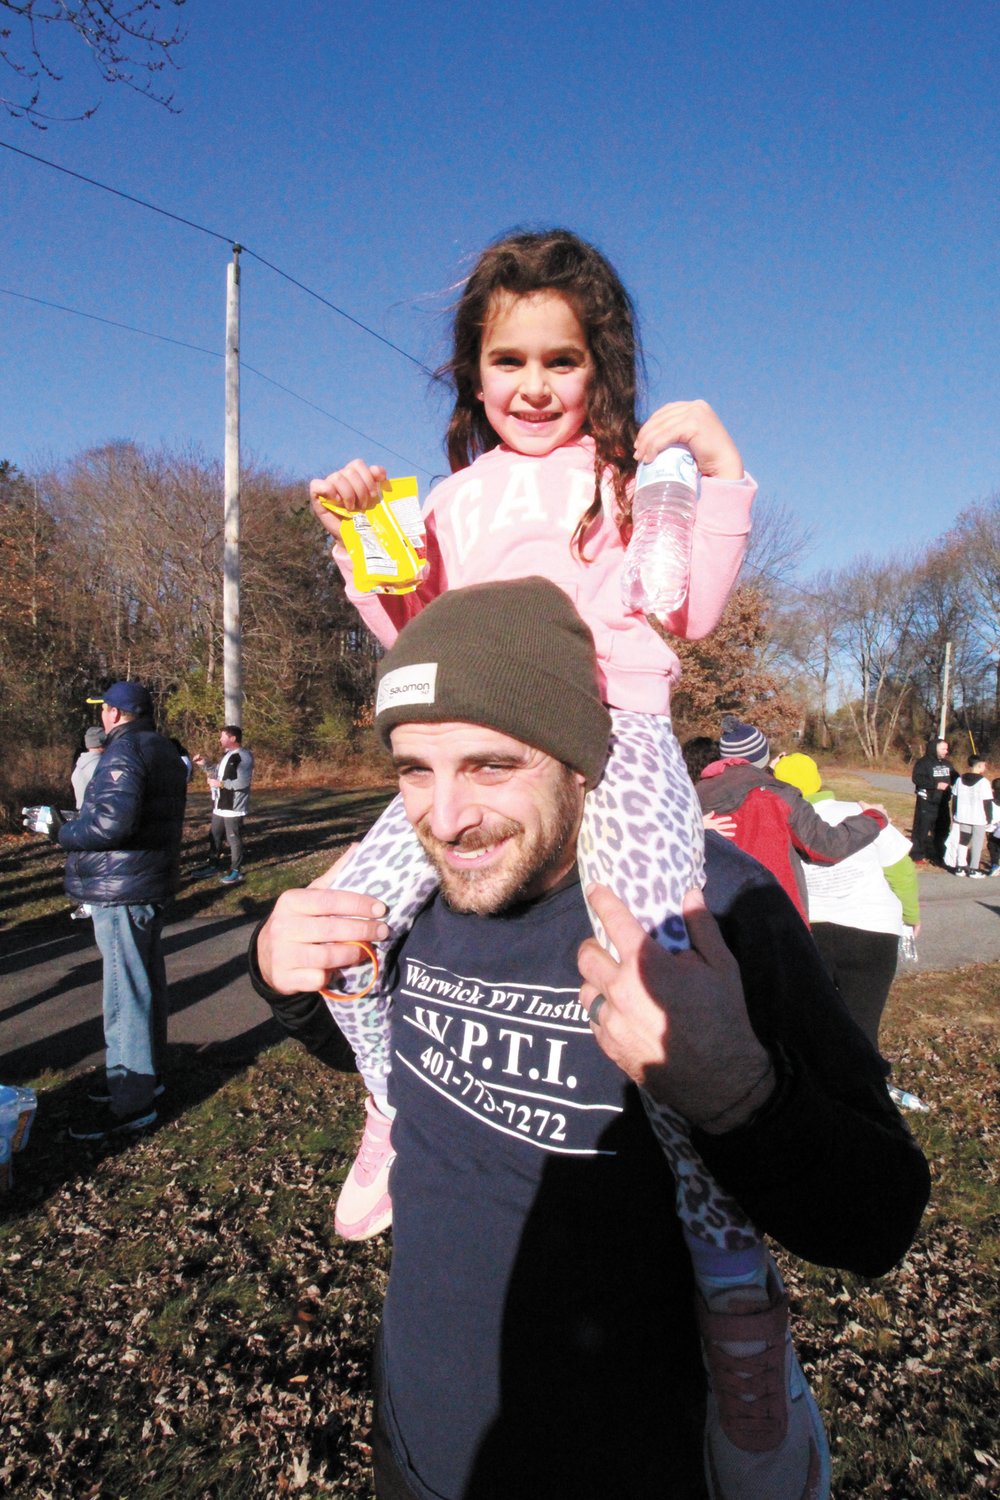 ON DAD’S SHOULDERS: Physical therapist Dan Forlasto, who has conducted the warmup for trot participants since the event started, hoisted his daughter Ella at the finish line.